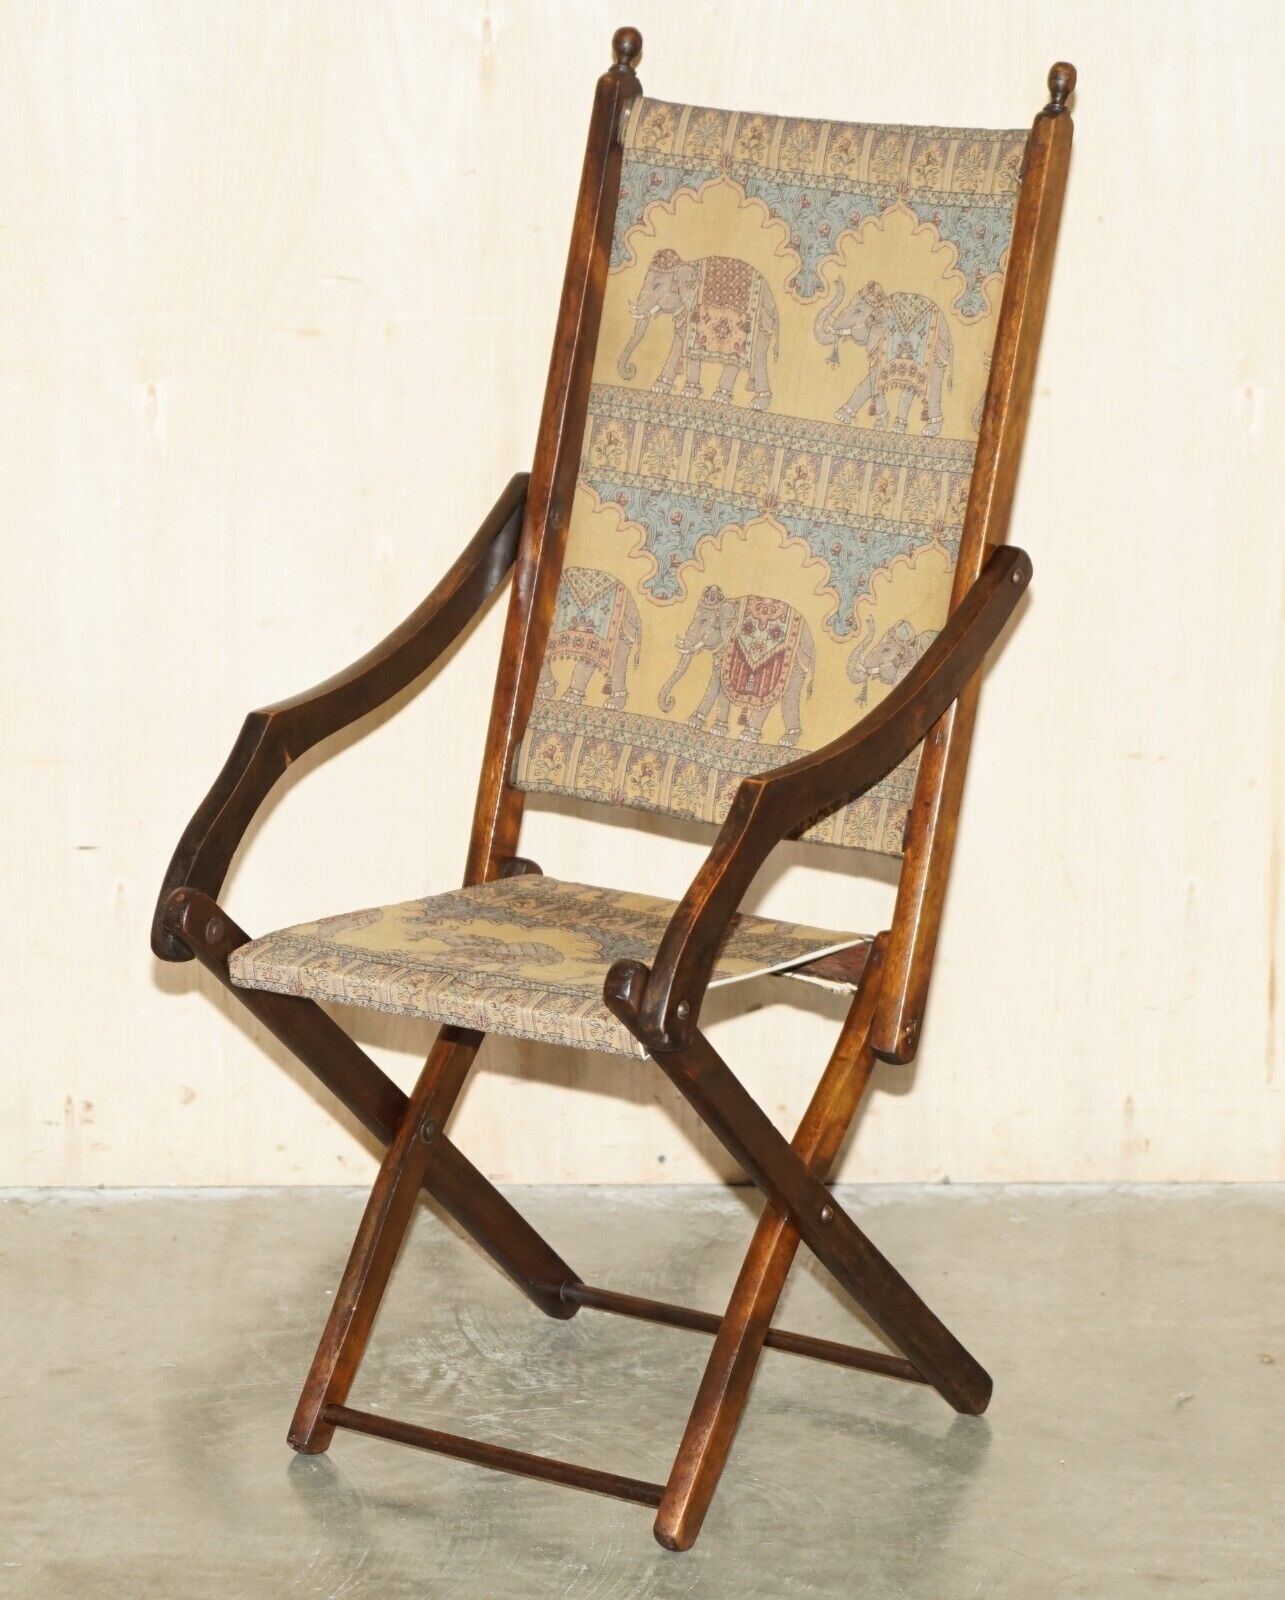 ANTIQUE CIR 1890 ANGLO INDIAN ELEPHANT COLONIAL FOLDING MILITARY CAMPAIGN CHAIR